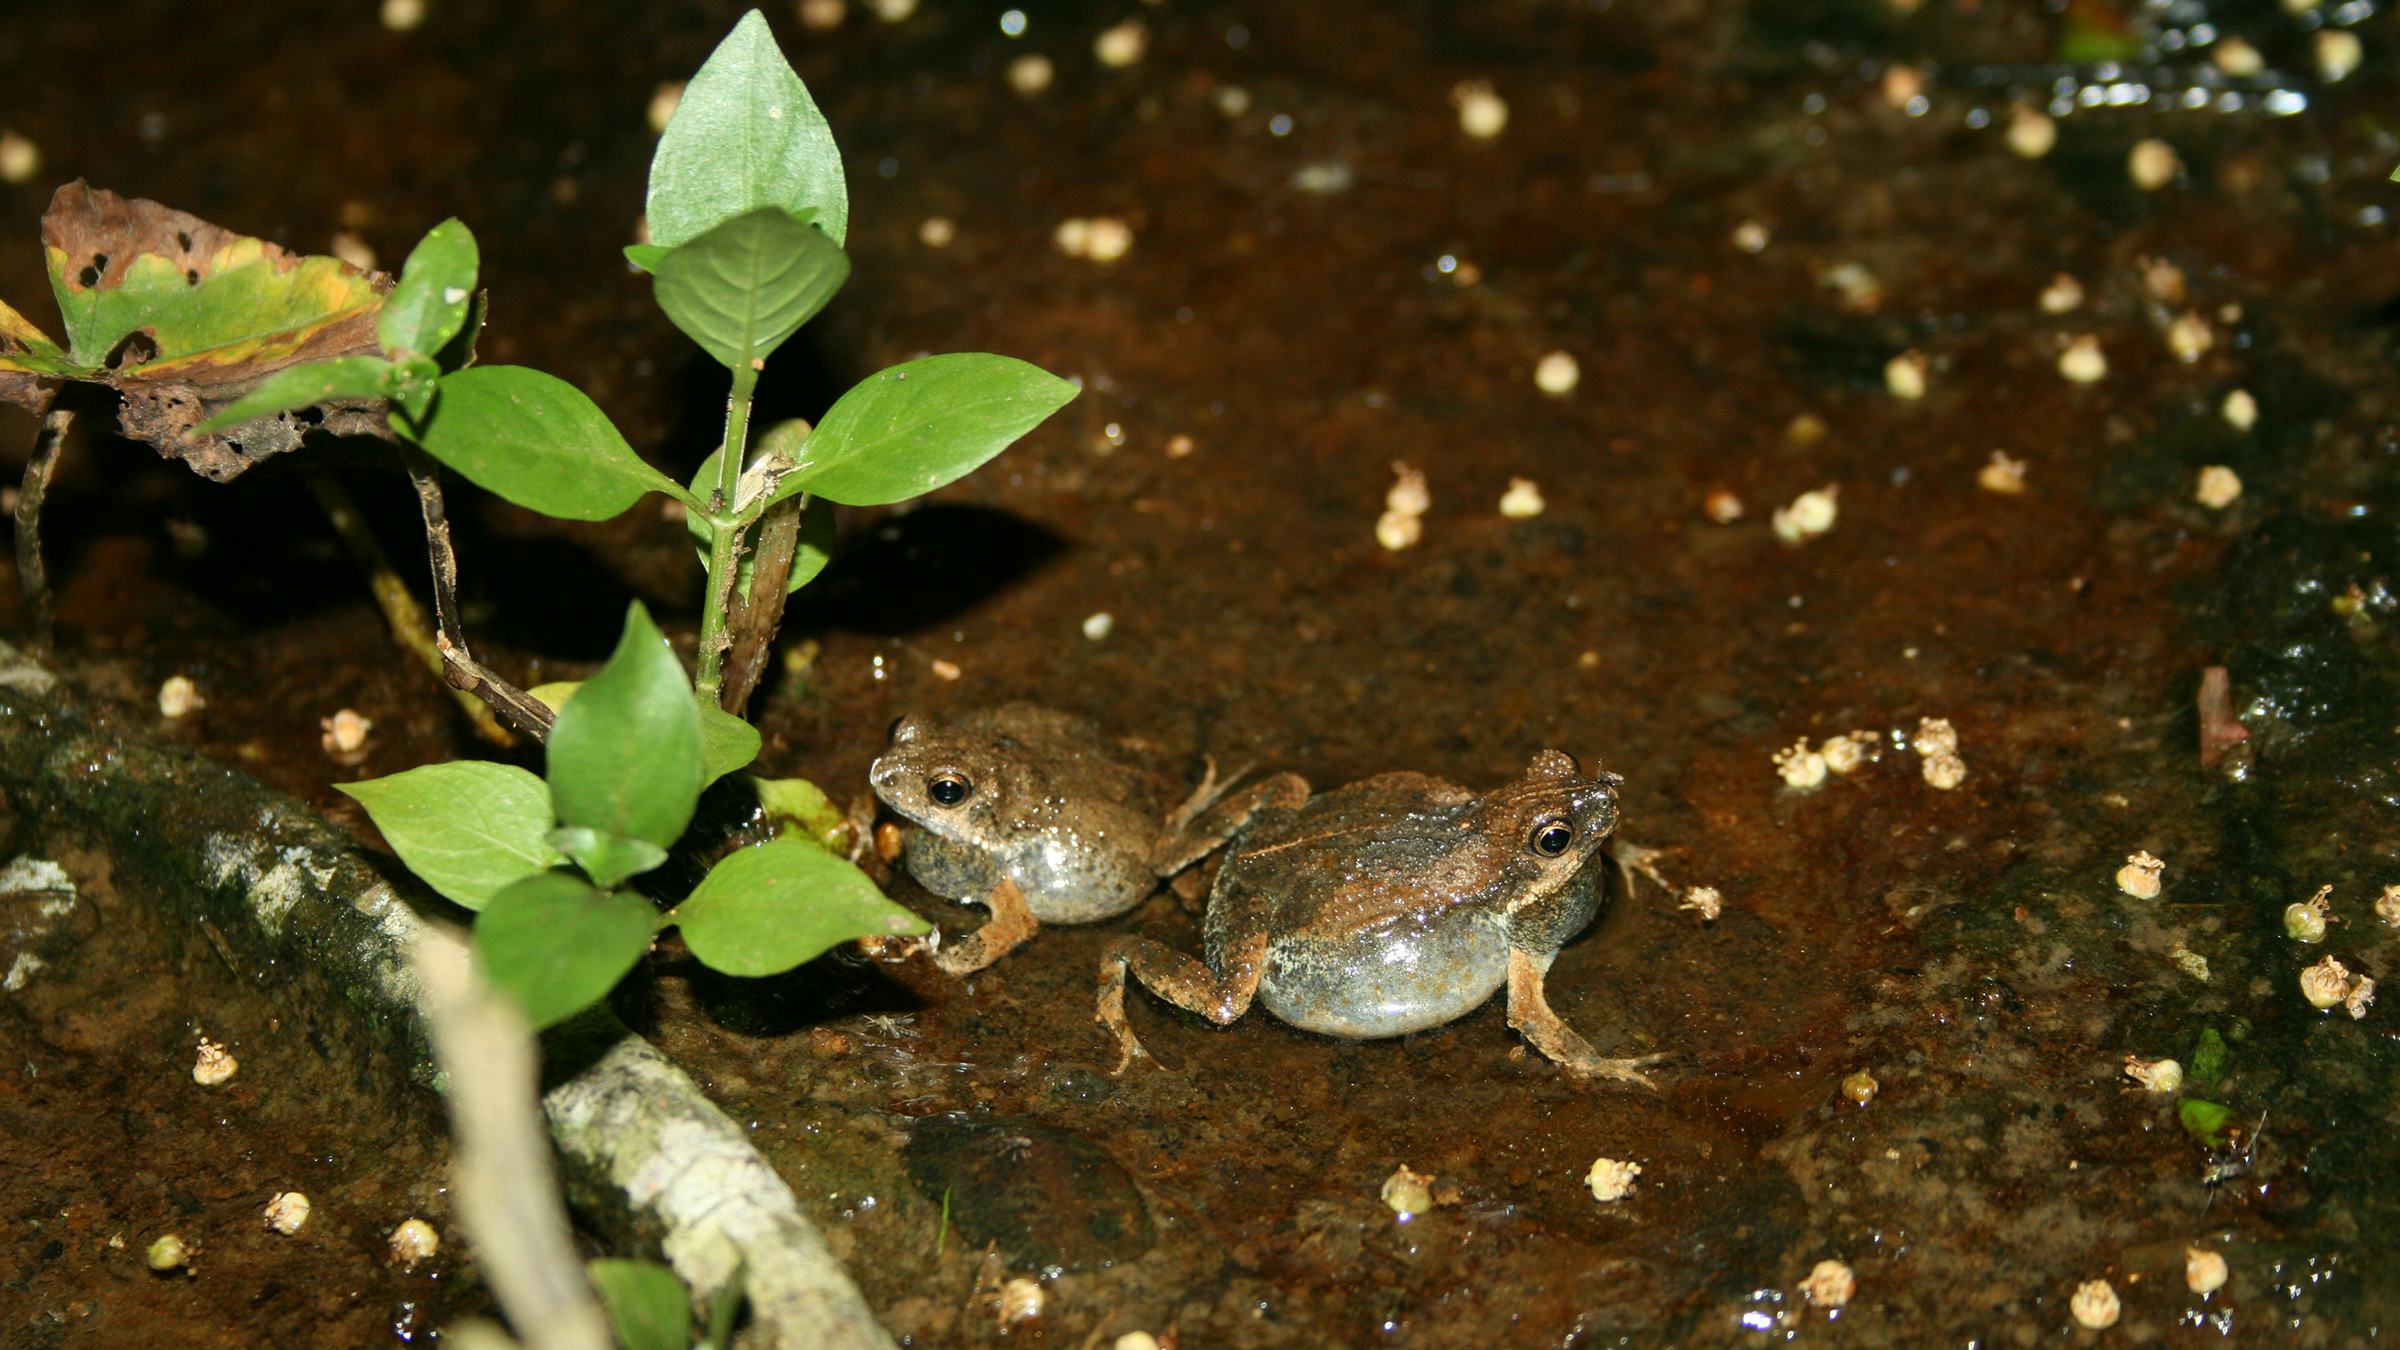 Two frogs sitting on moist ground